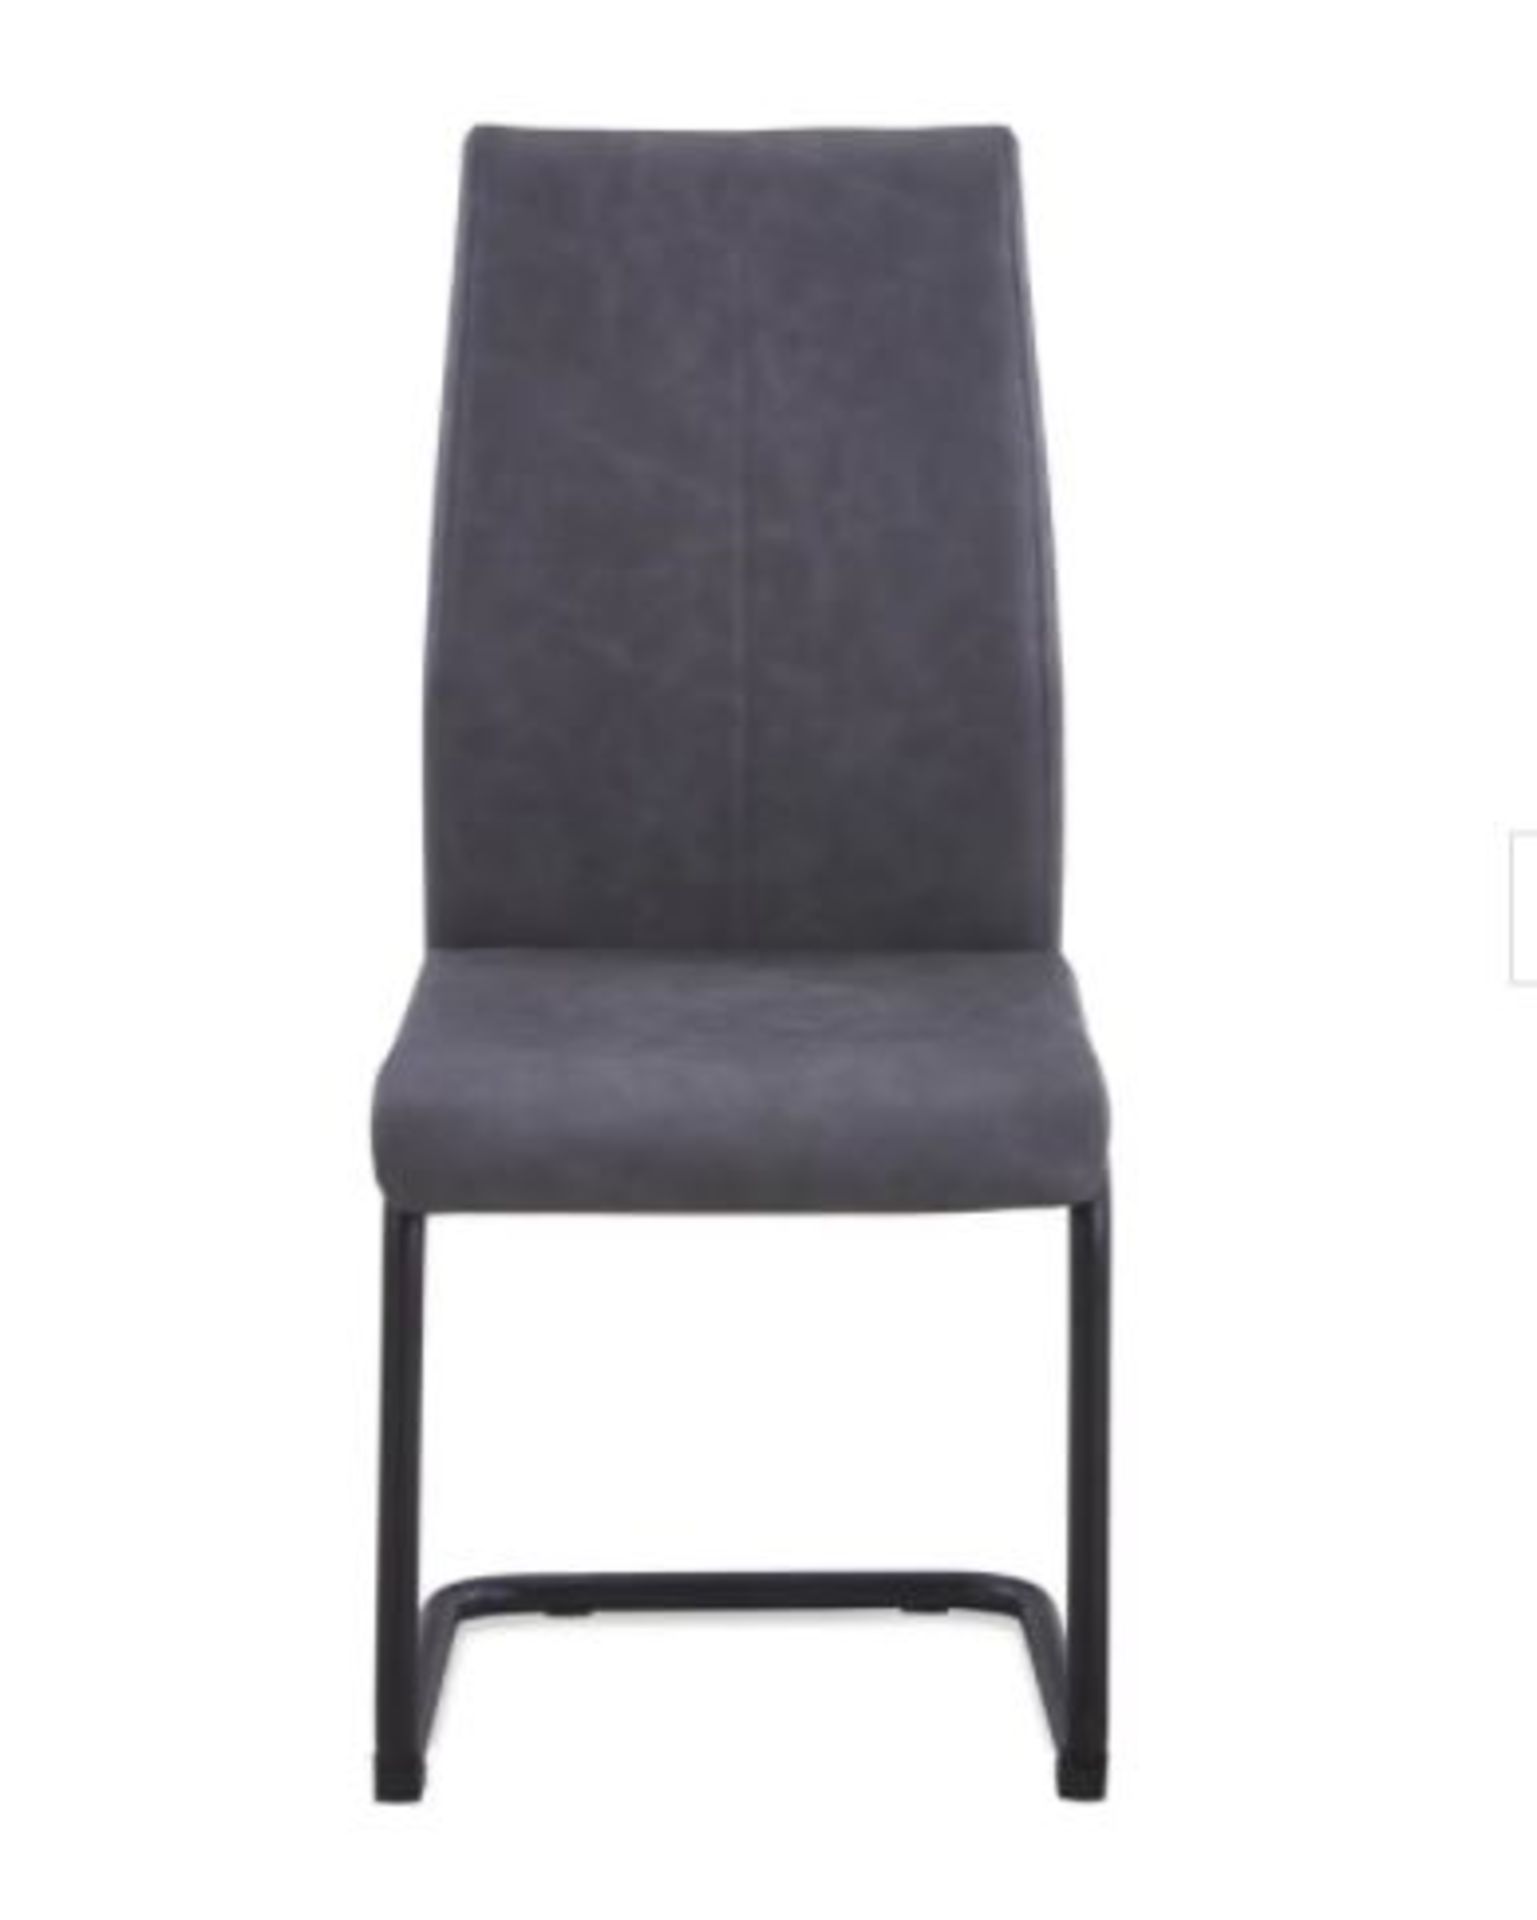 (R10H) 2x Skelby Cantilever Dining Chairs Grey RRP £90. Metal Frame With Black Powder Coat Finish. - Image 3 of 4